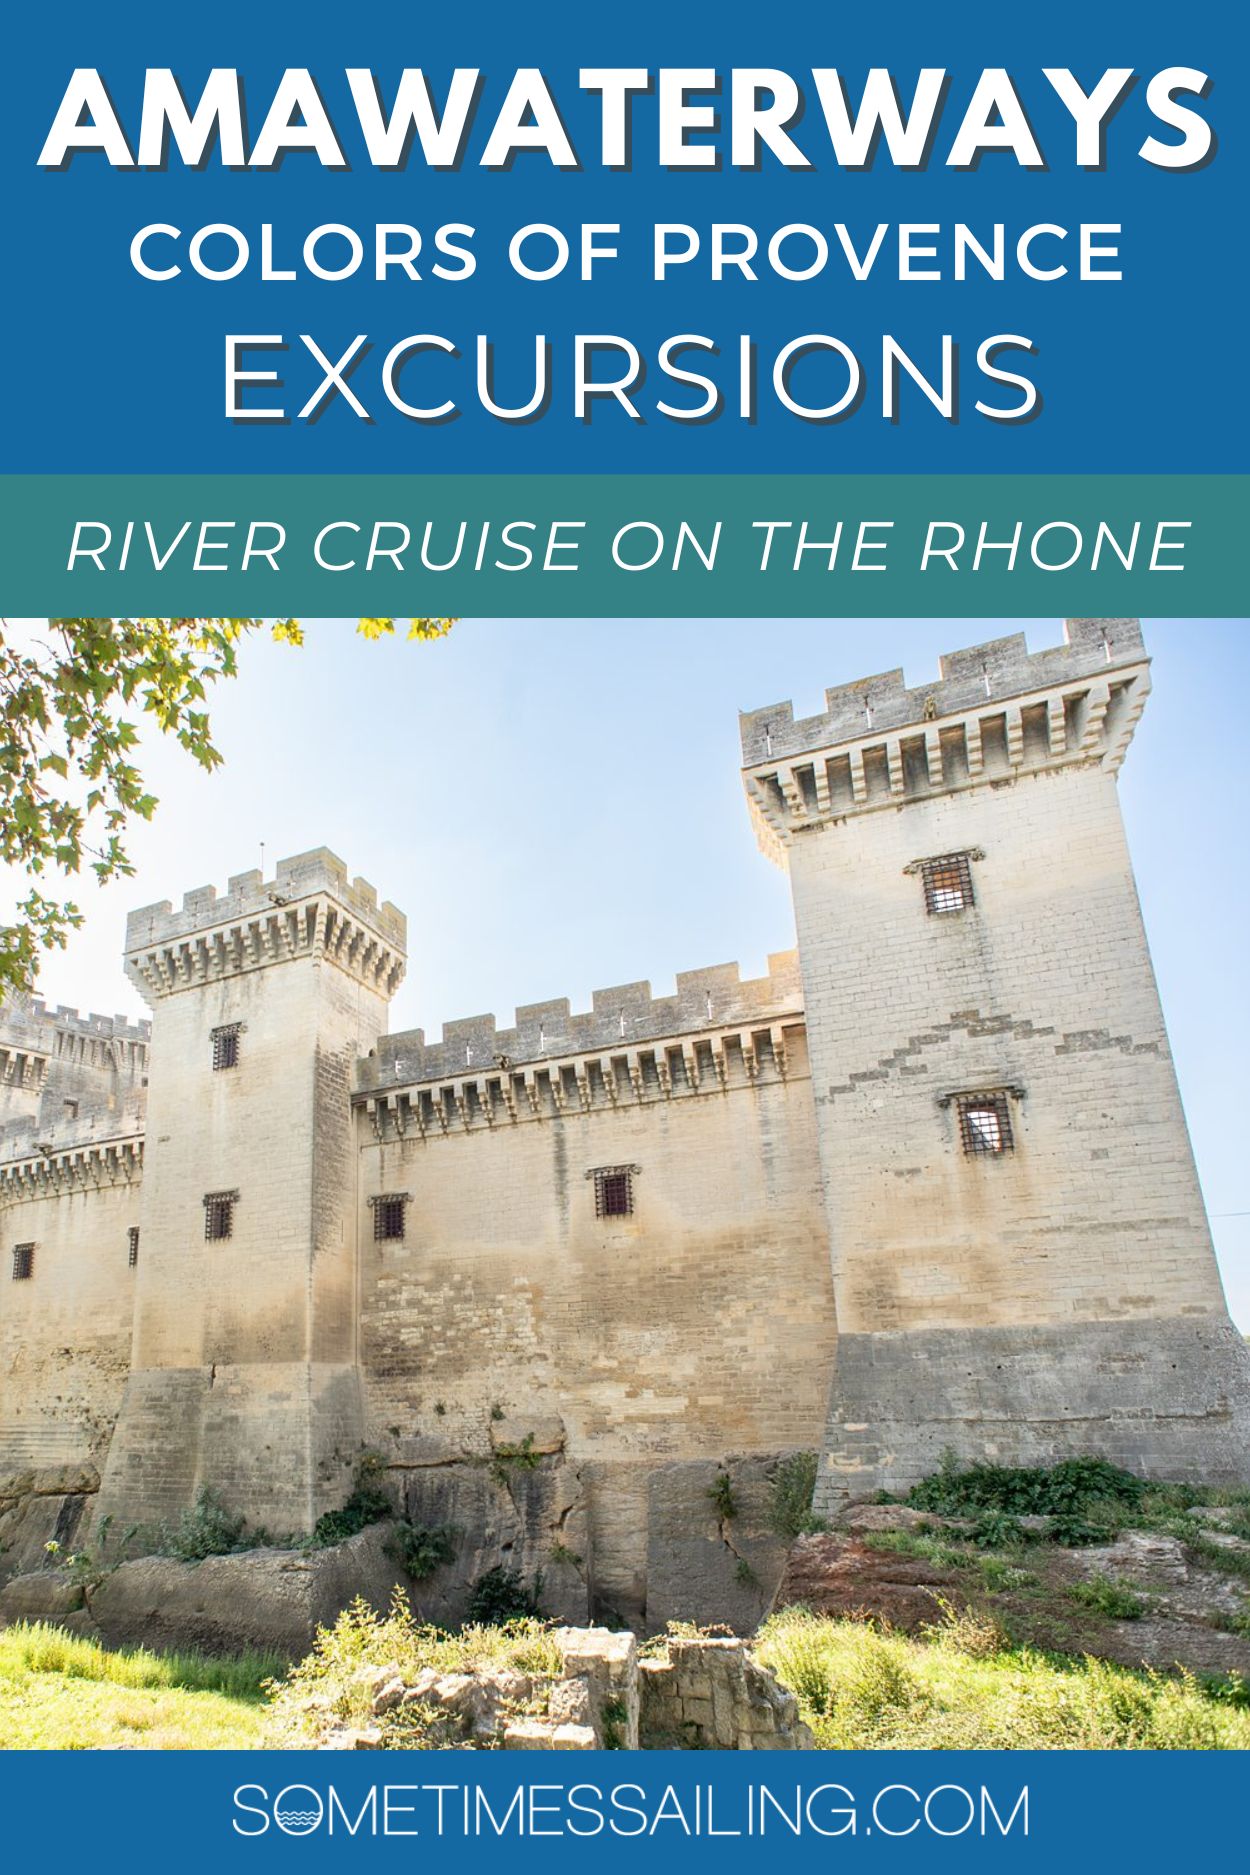 AmaWaterways Colors of Provence Excursions River Cruise on the Rhone, with a picture of a castle.